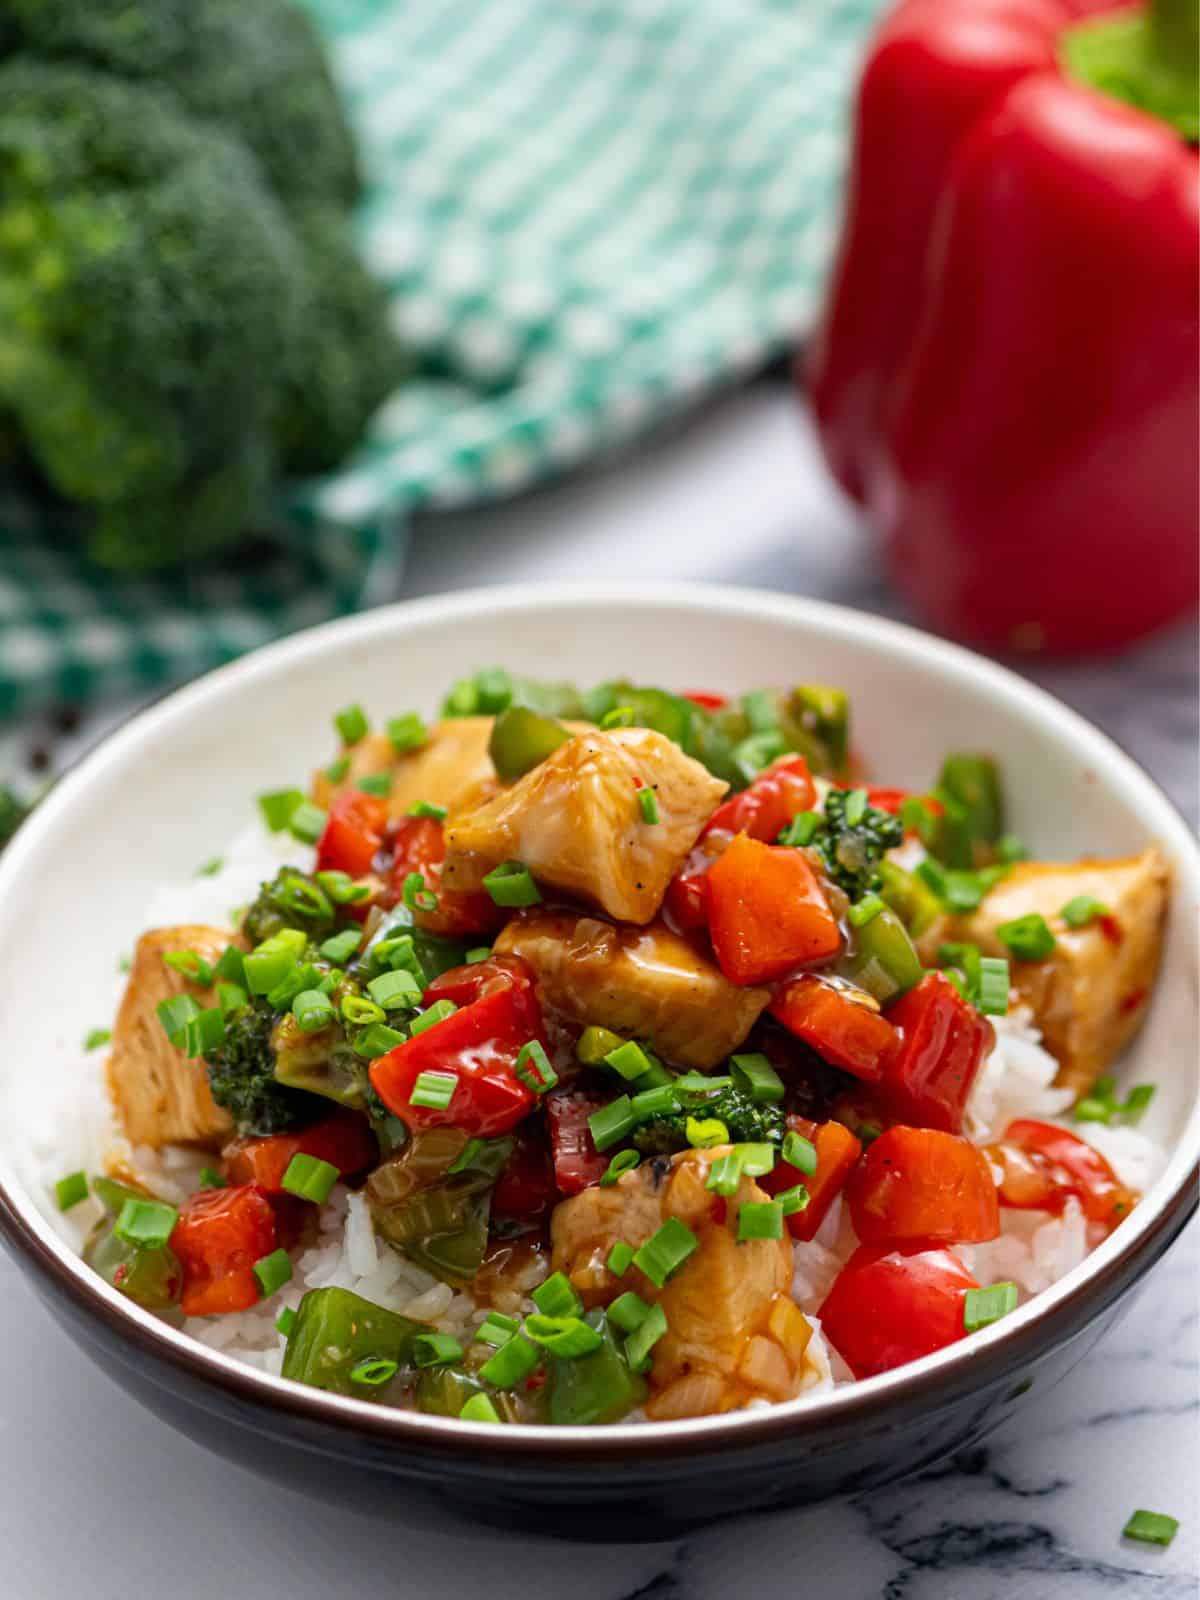 Bowl of Hunan Chicken served over rice.